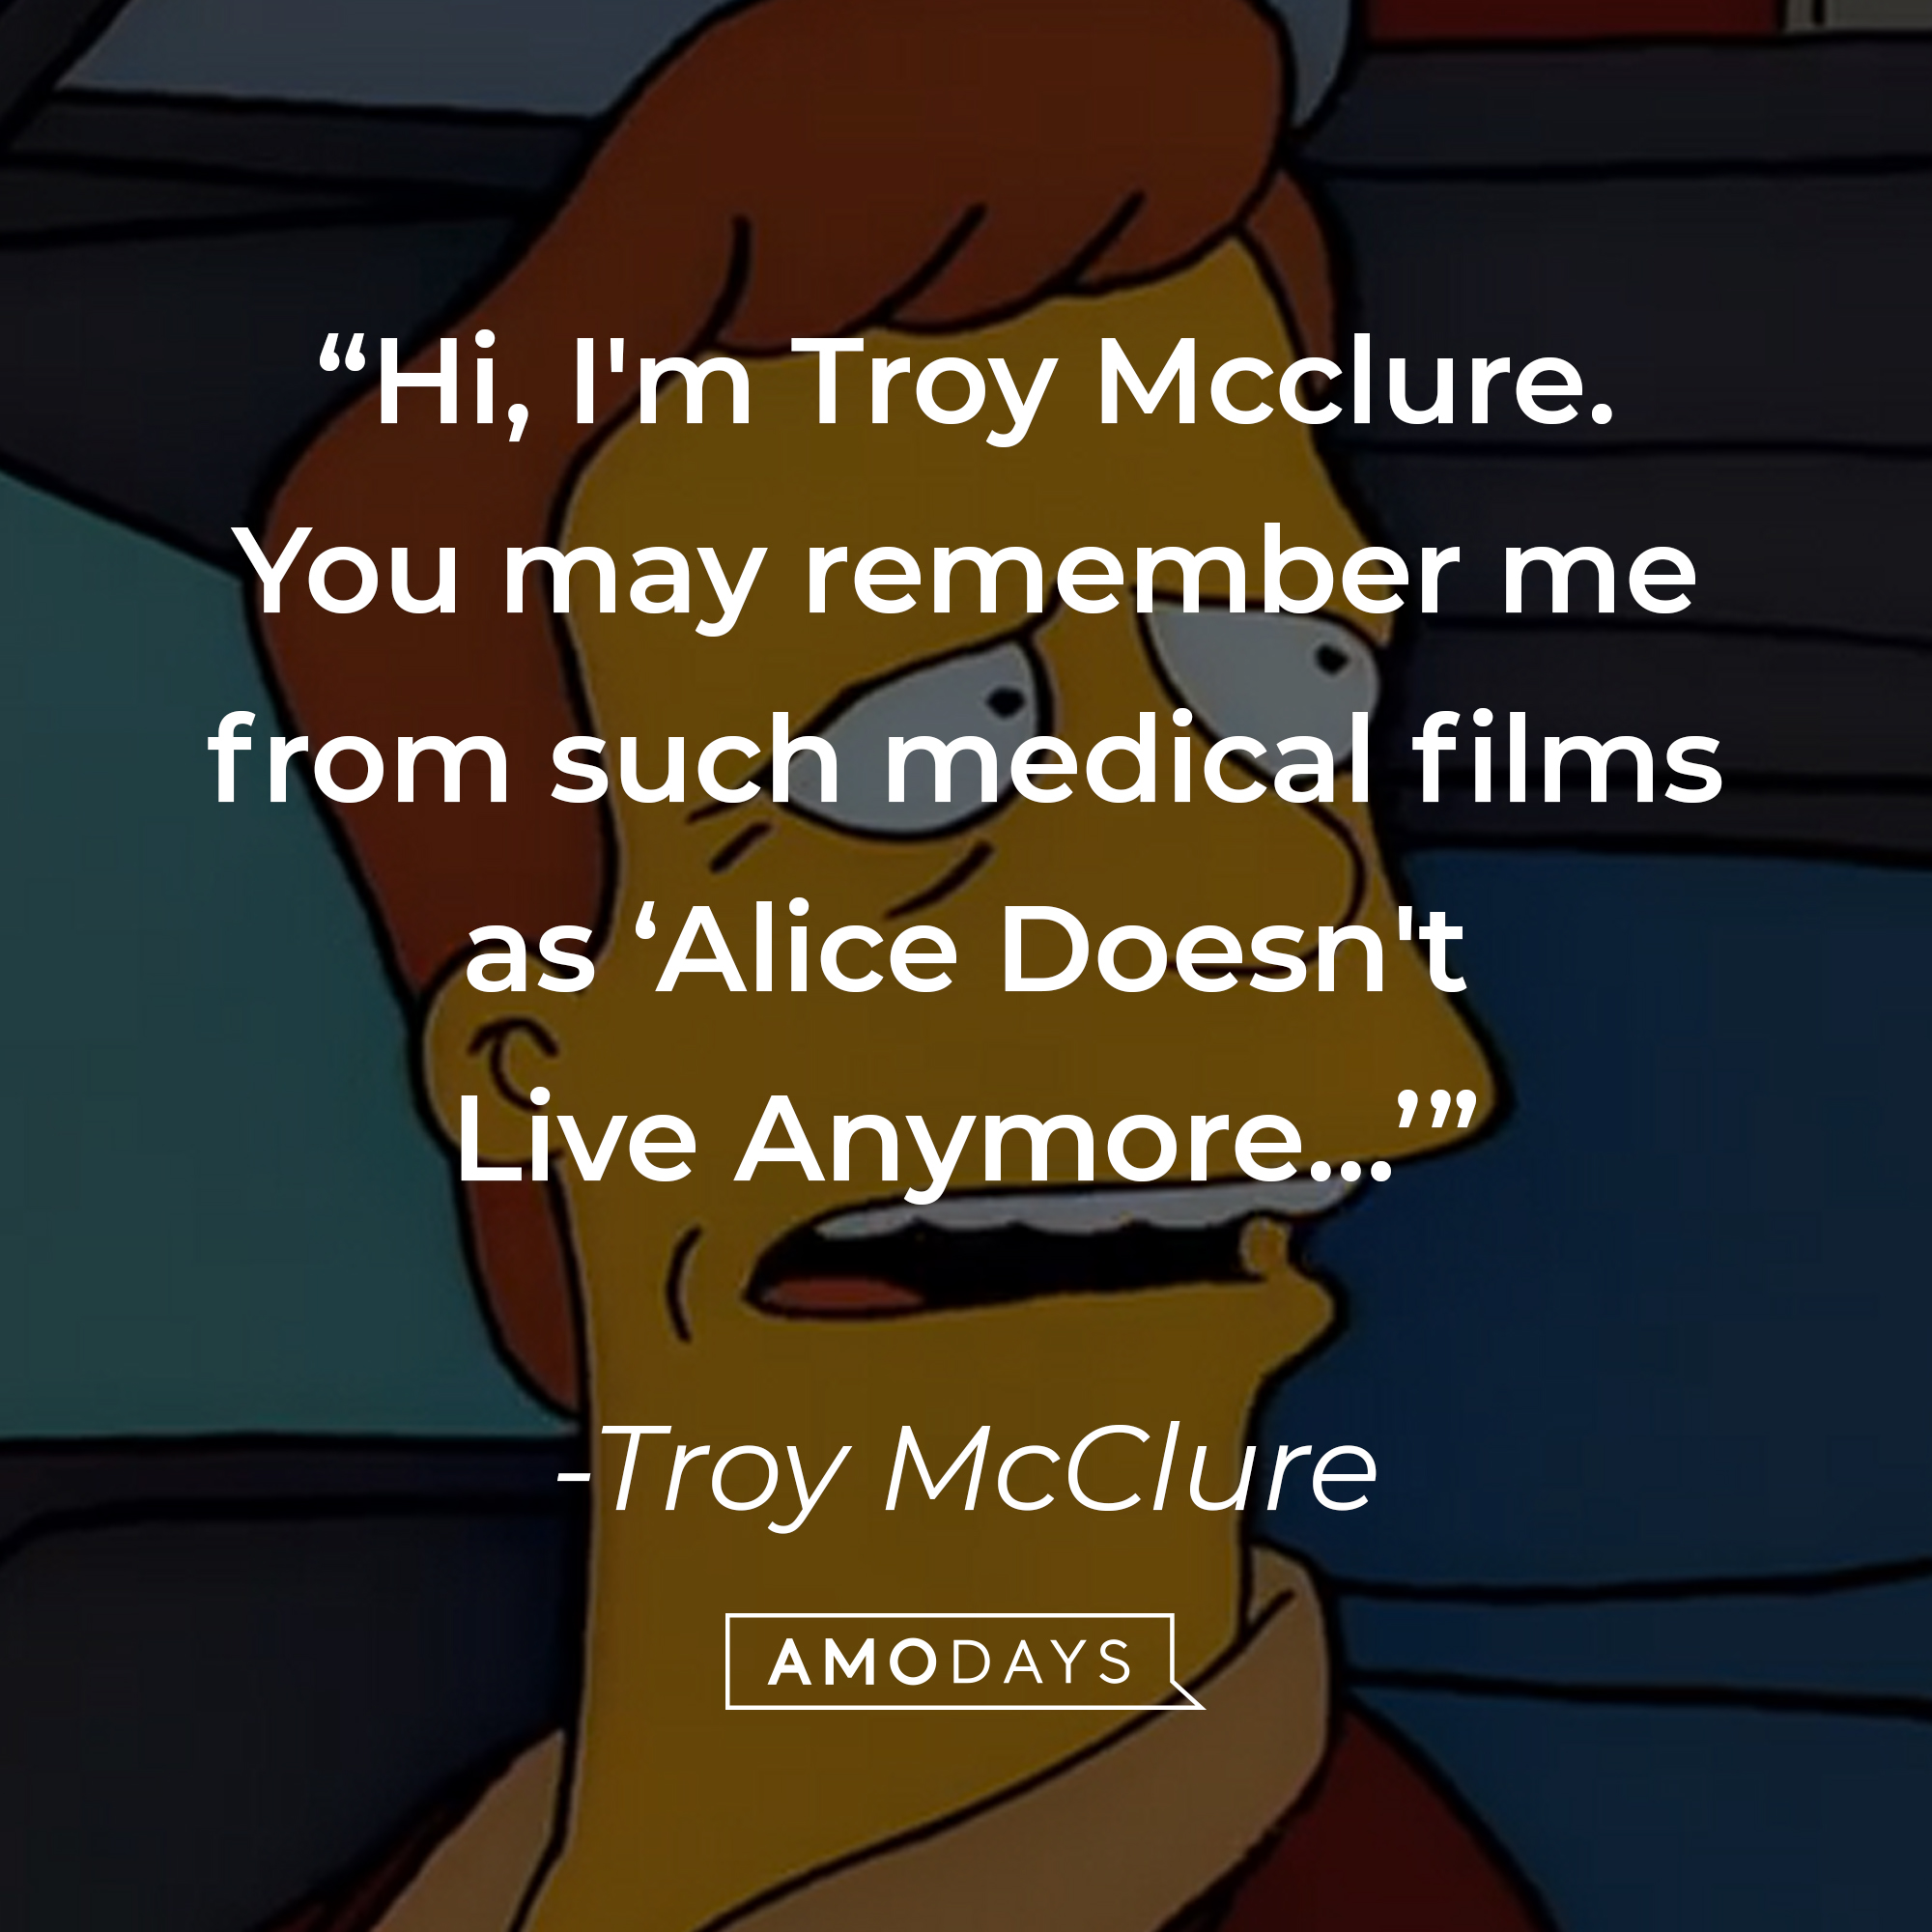 Troy McClure, with his quote: “Hi, I'm Troy Mcclure. you may remember me from such medical films as ‘Alice Doesn't Live Anymore…'” | Source: facebook.com/TheSimpsons